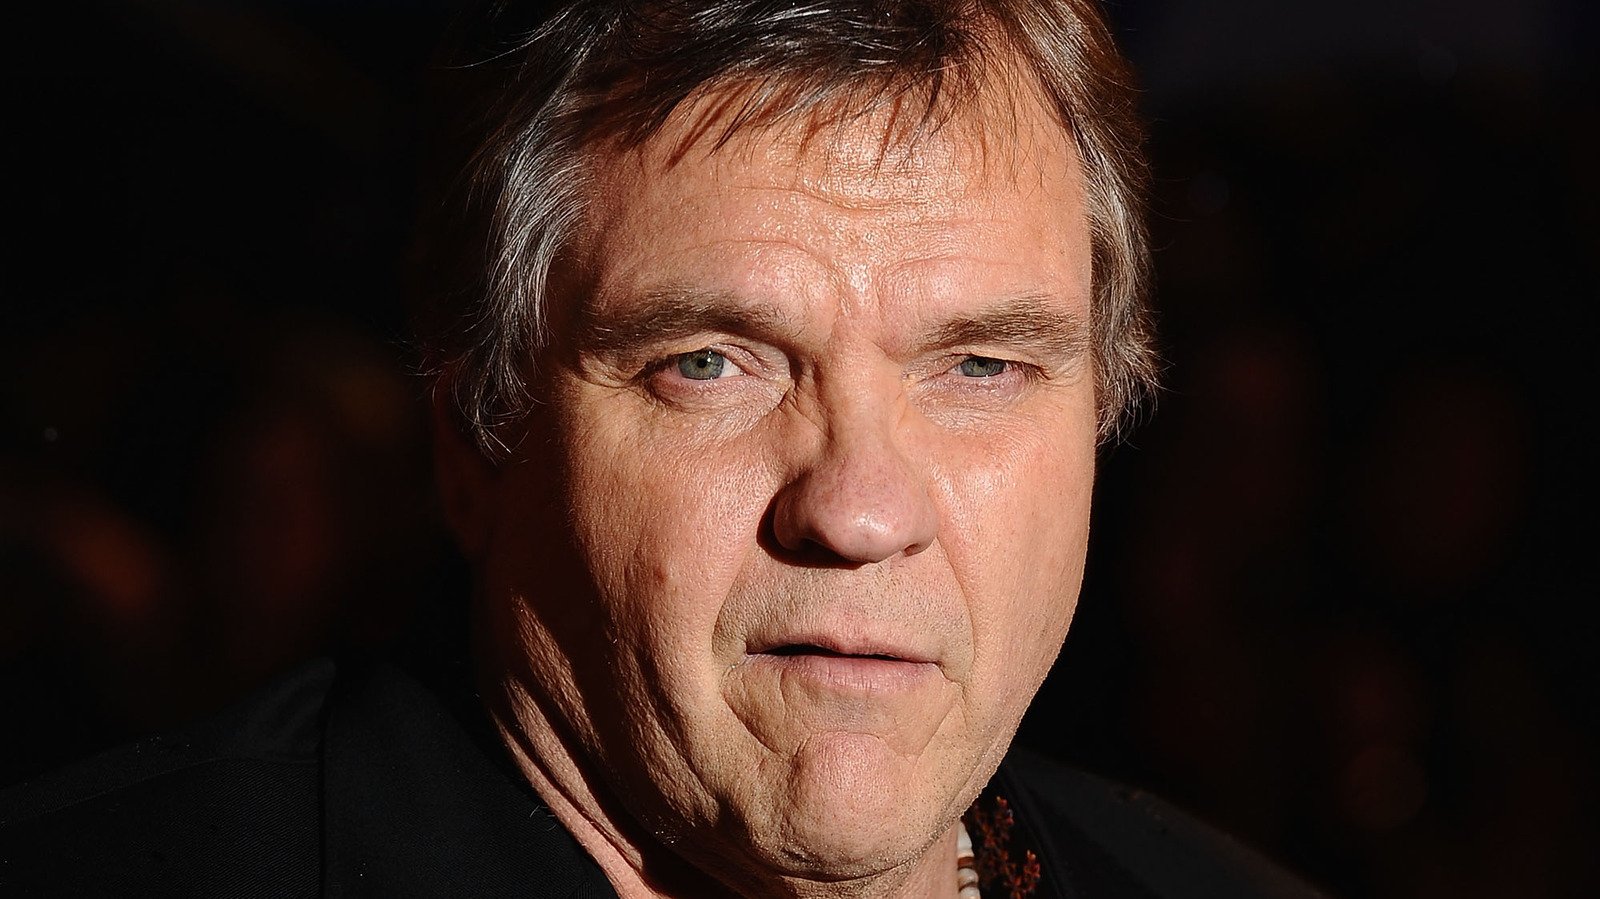 The Heartbreaking Death Of Singer Meat Loaf - The List